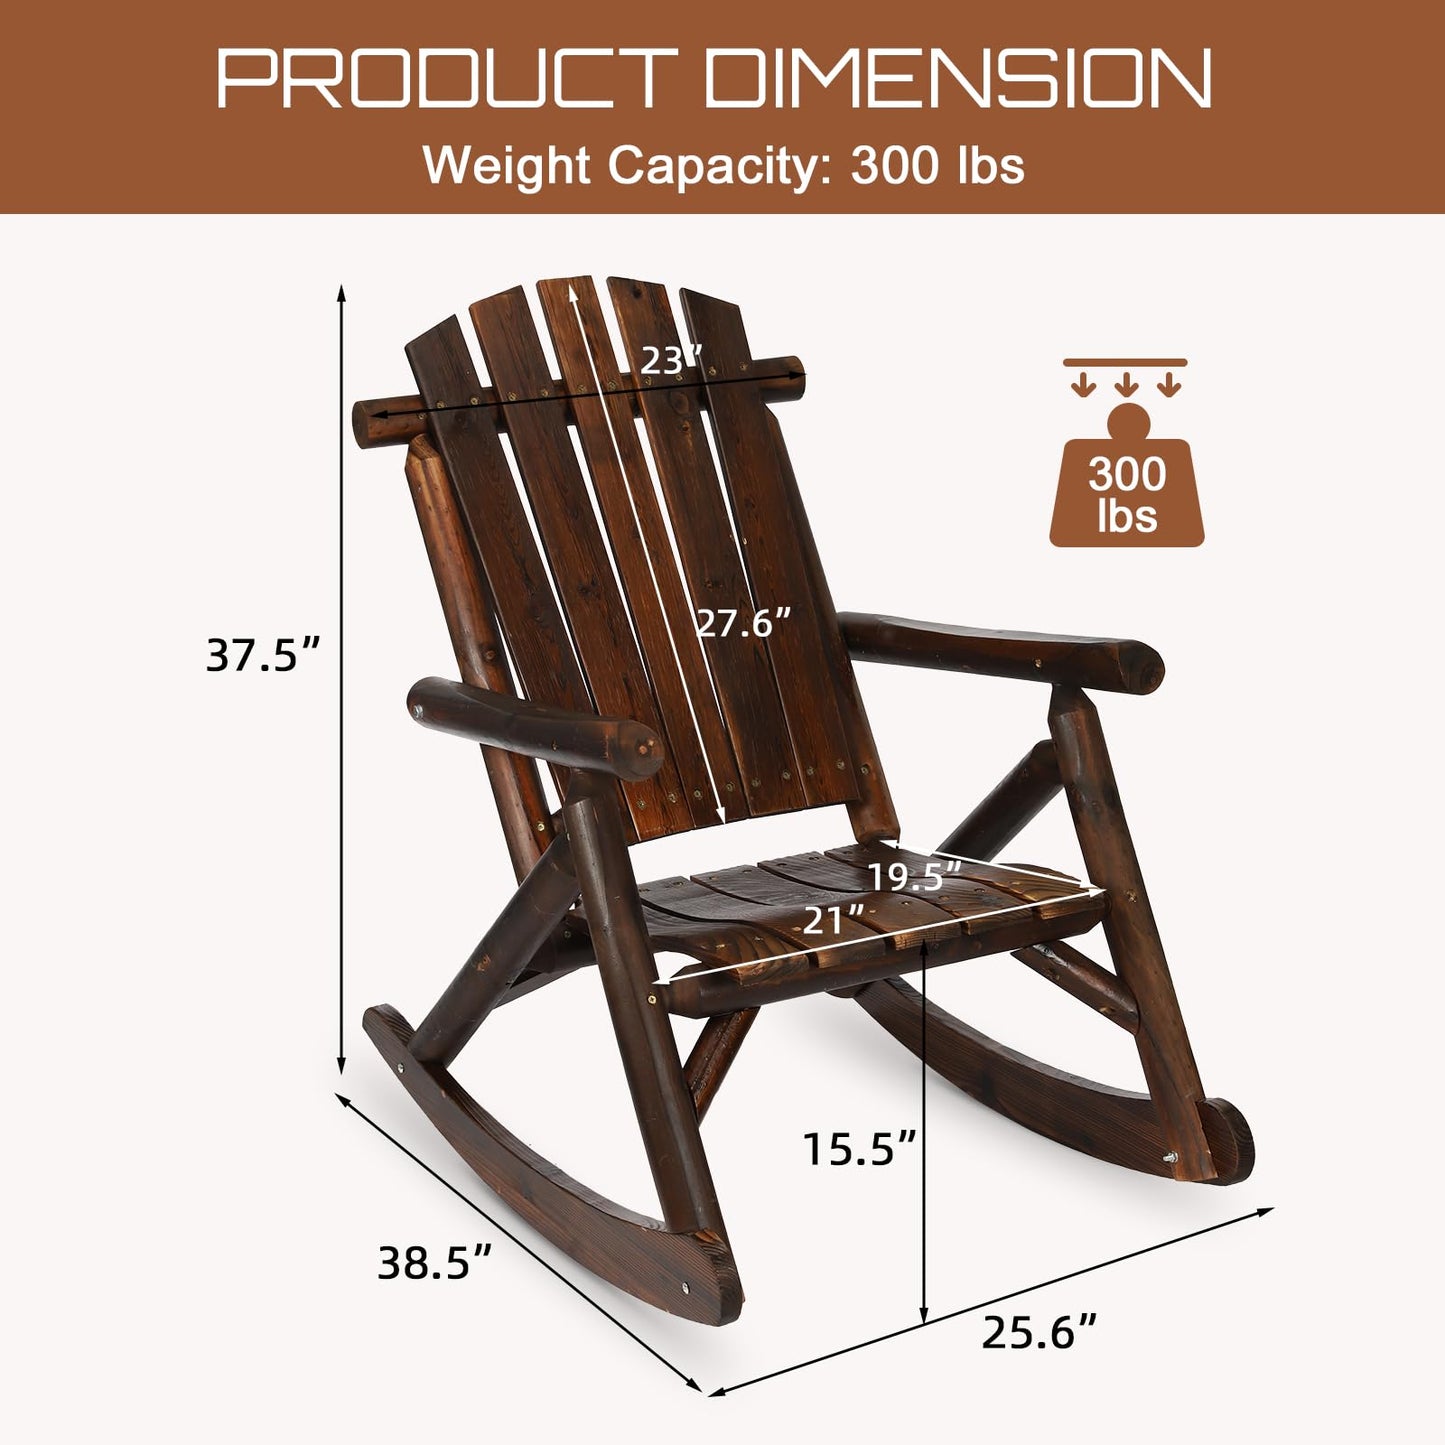 HOMEDIARY Wooden Adirondack Rocking Chair, Patio Log Rocker Outdoor Lounge Chair with Slatted Wooden Design, High Fanned Back & Classic Rustic Style for Garden Patio Backyard Porch, Carbonized